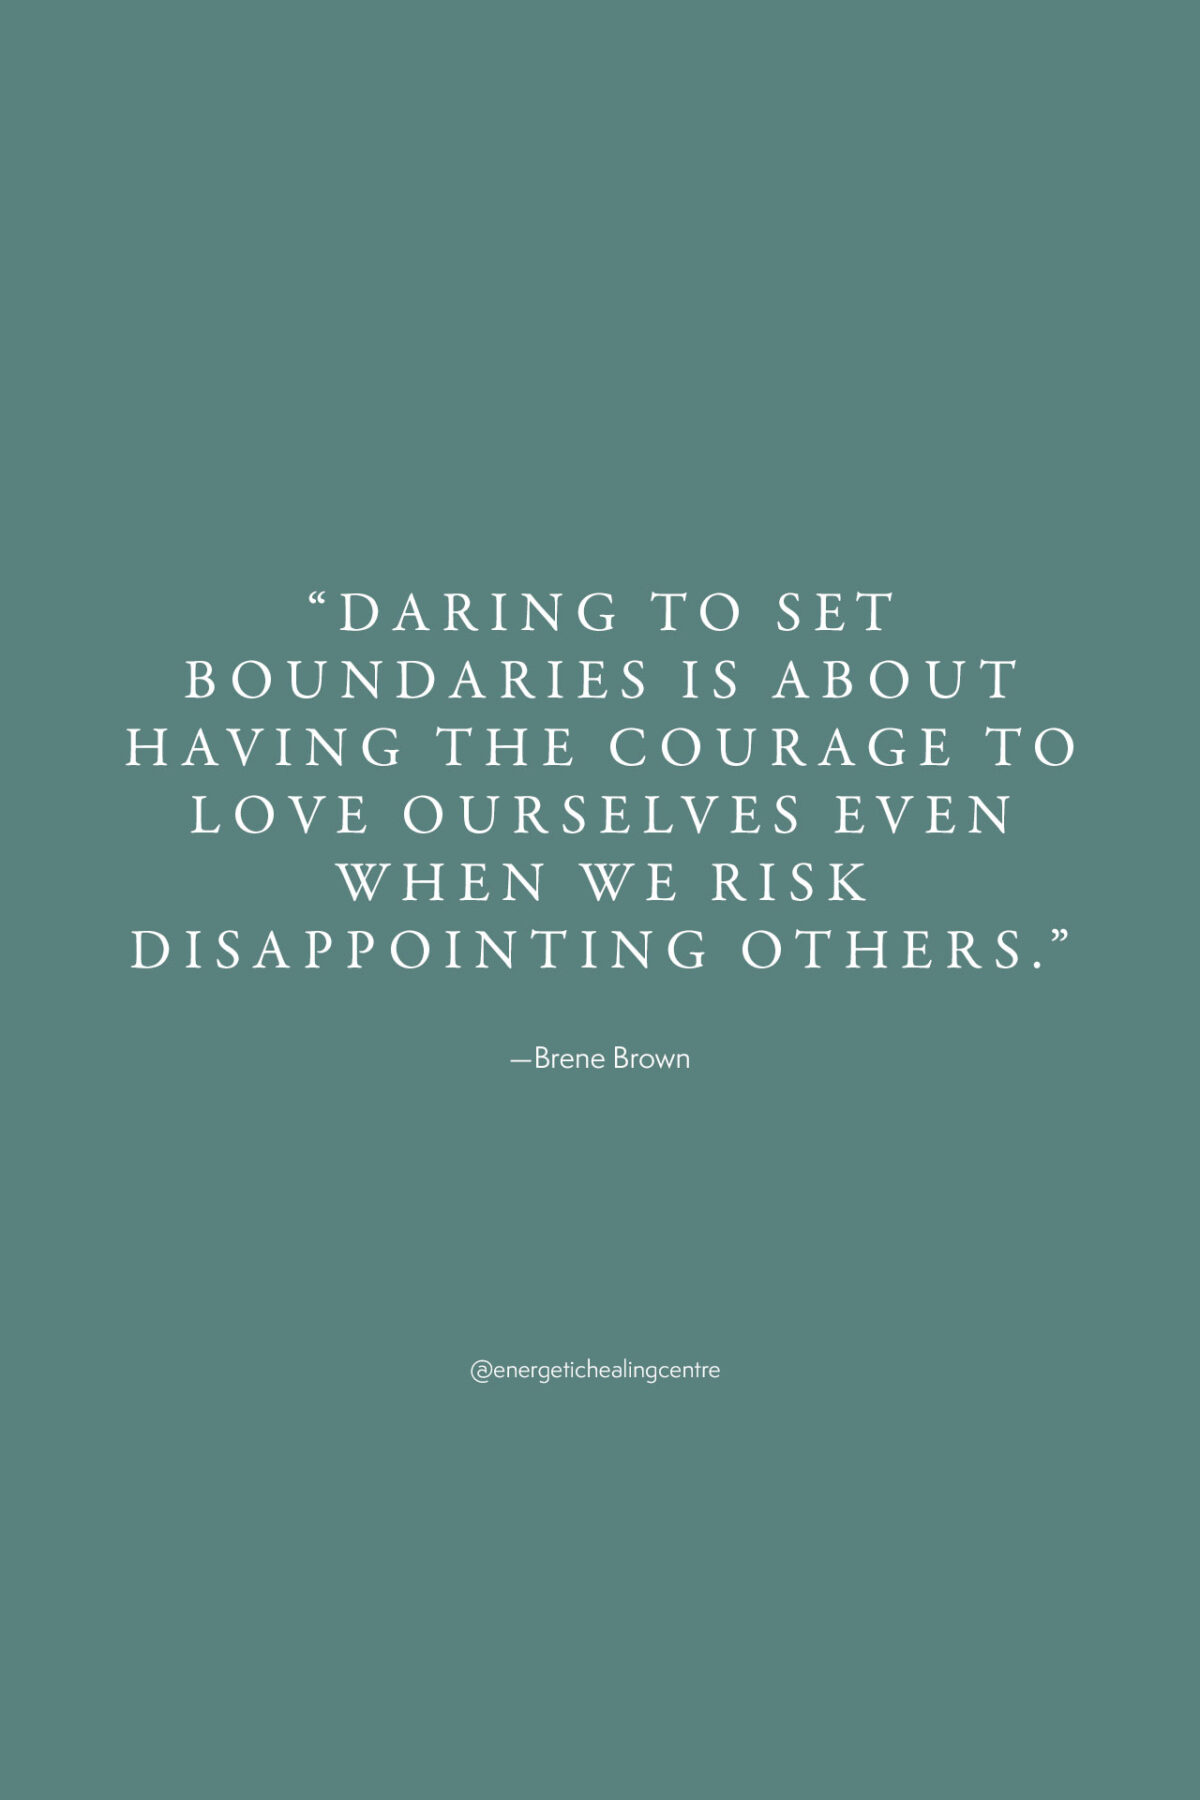 What Are Healthy Boundaries? How To Establish Them